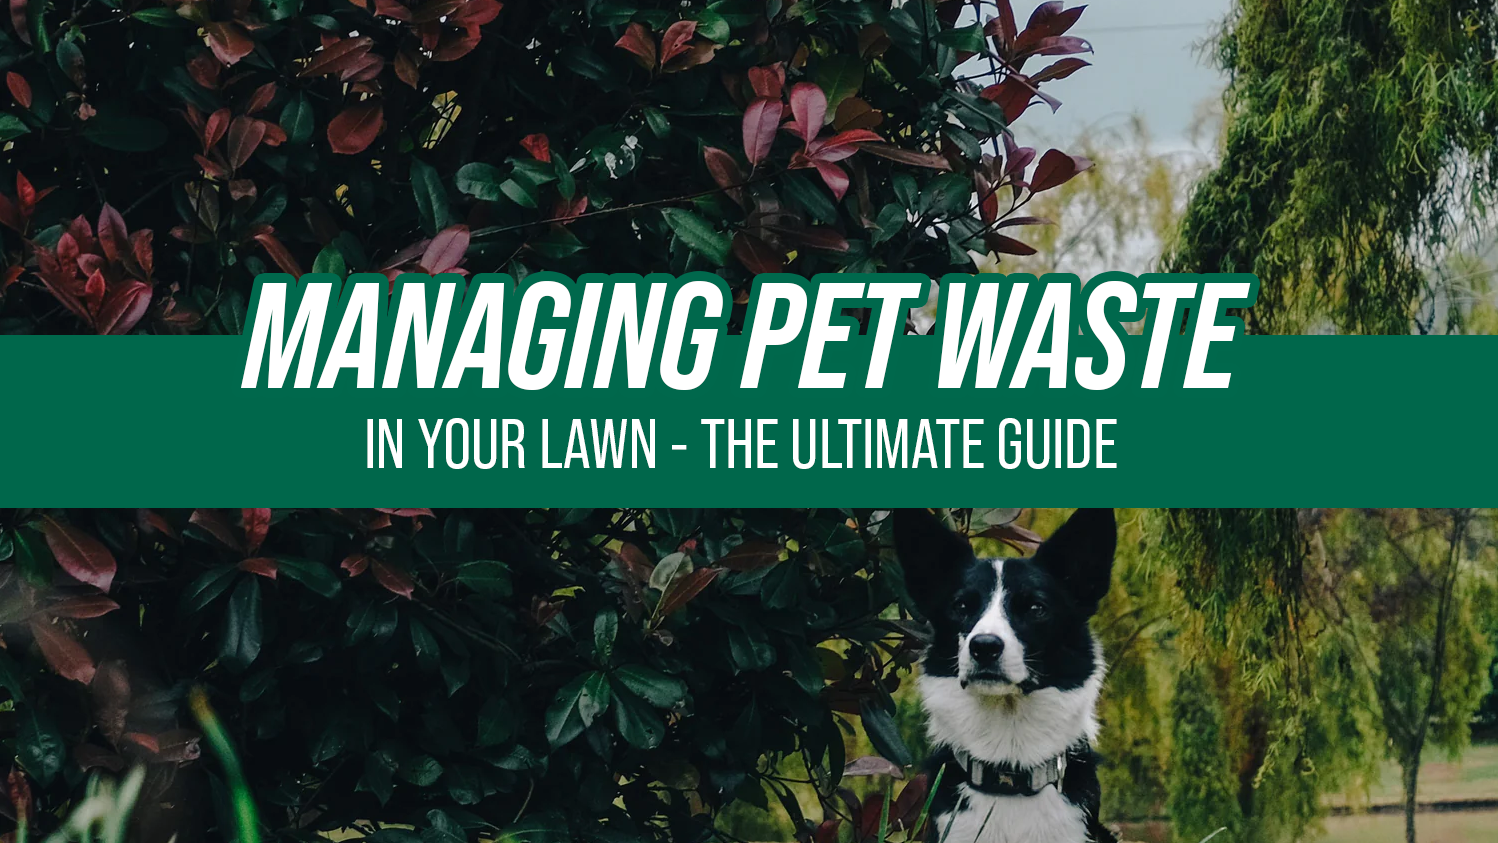 The Ultimate Guide to Managing Pet Waste in Your Lawn